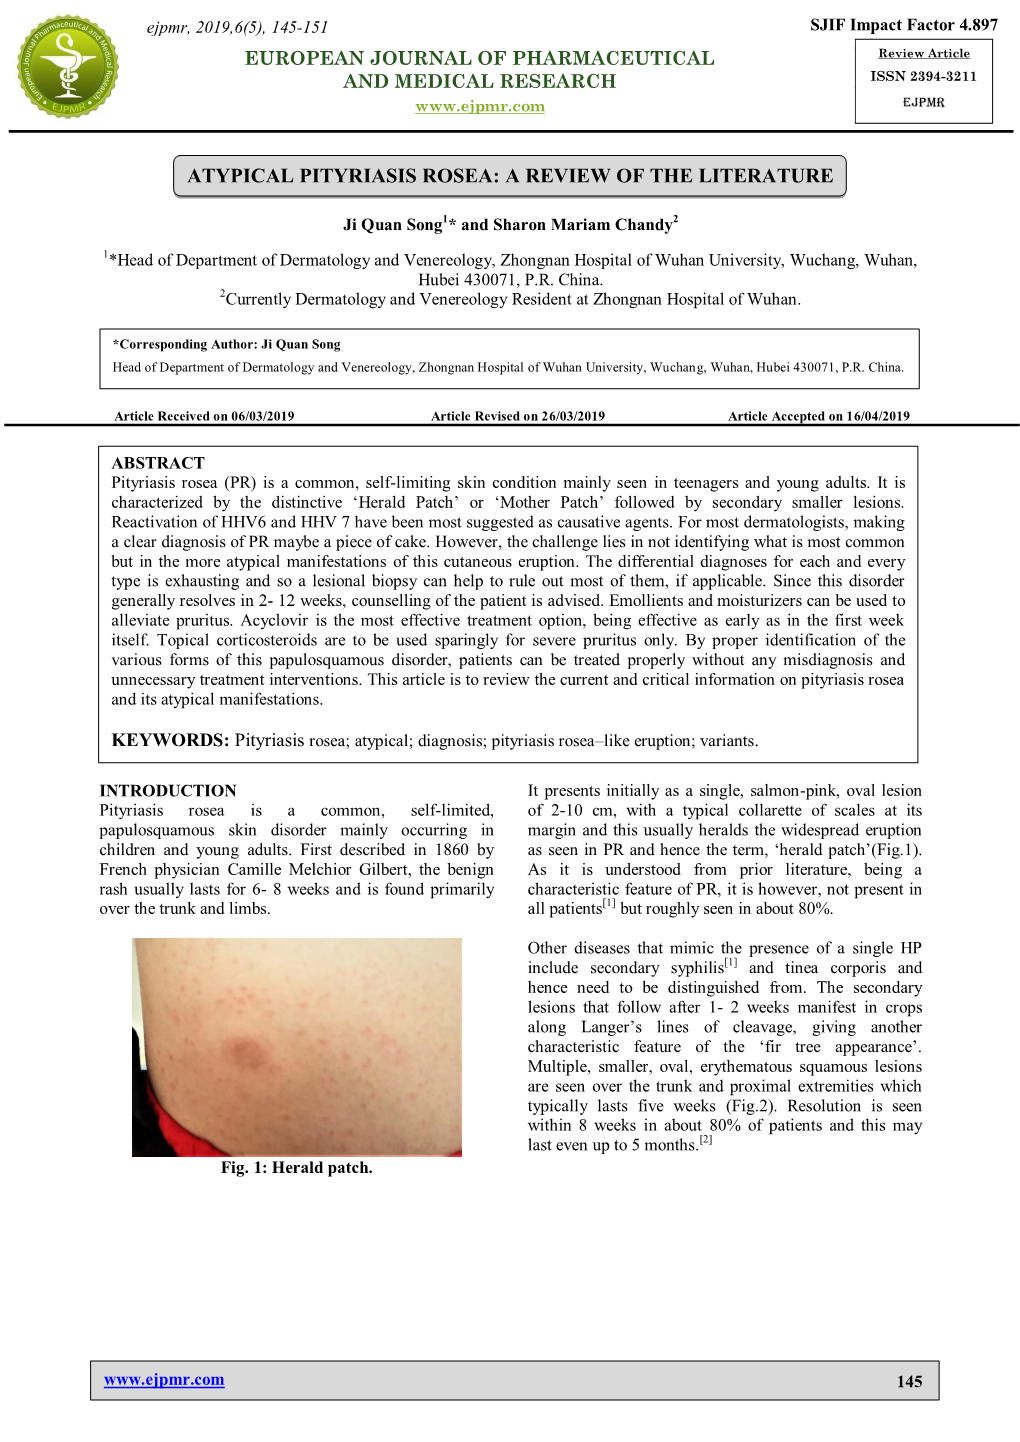 Atypical Pityriasis Rosea: a Review of the Literature